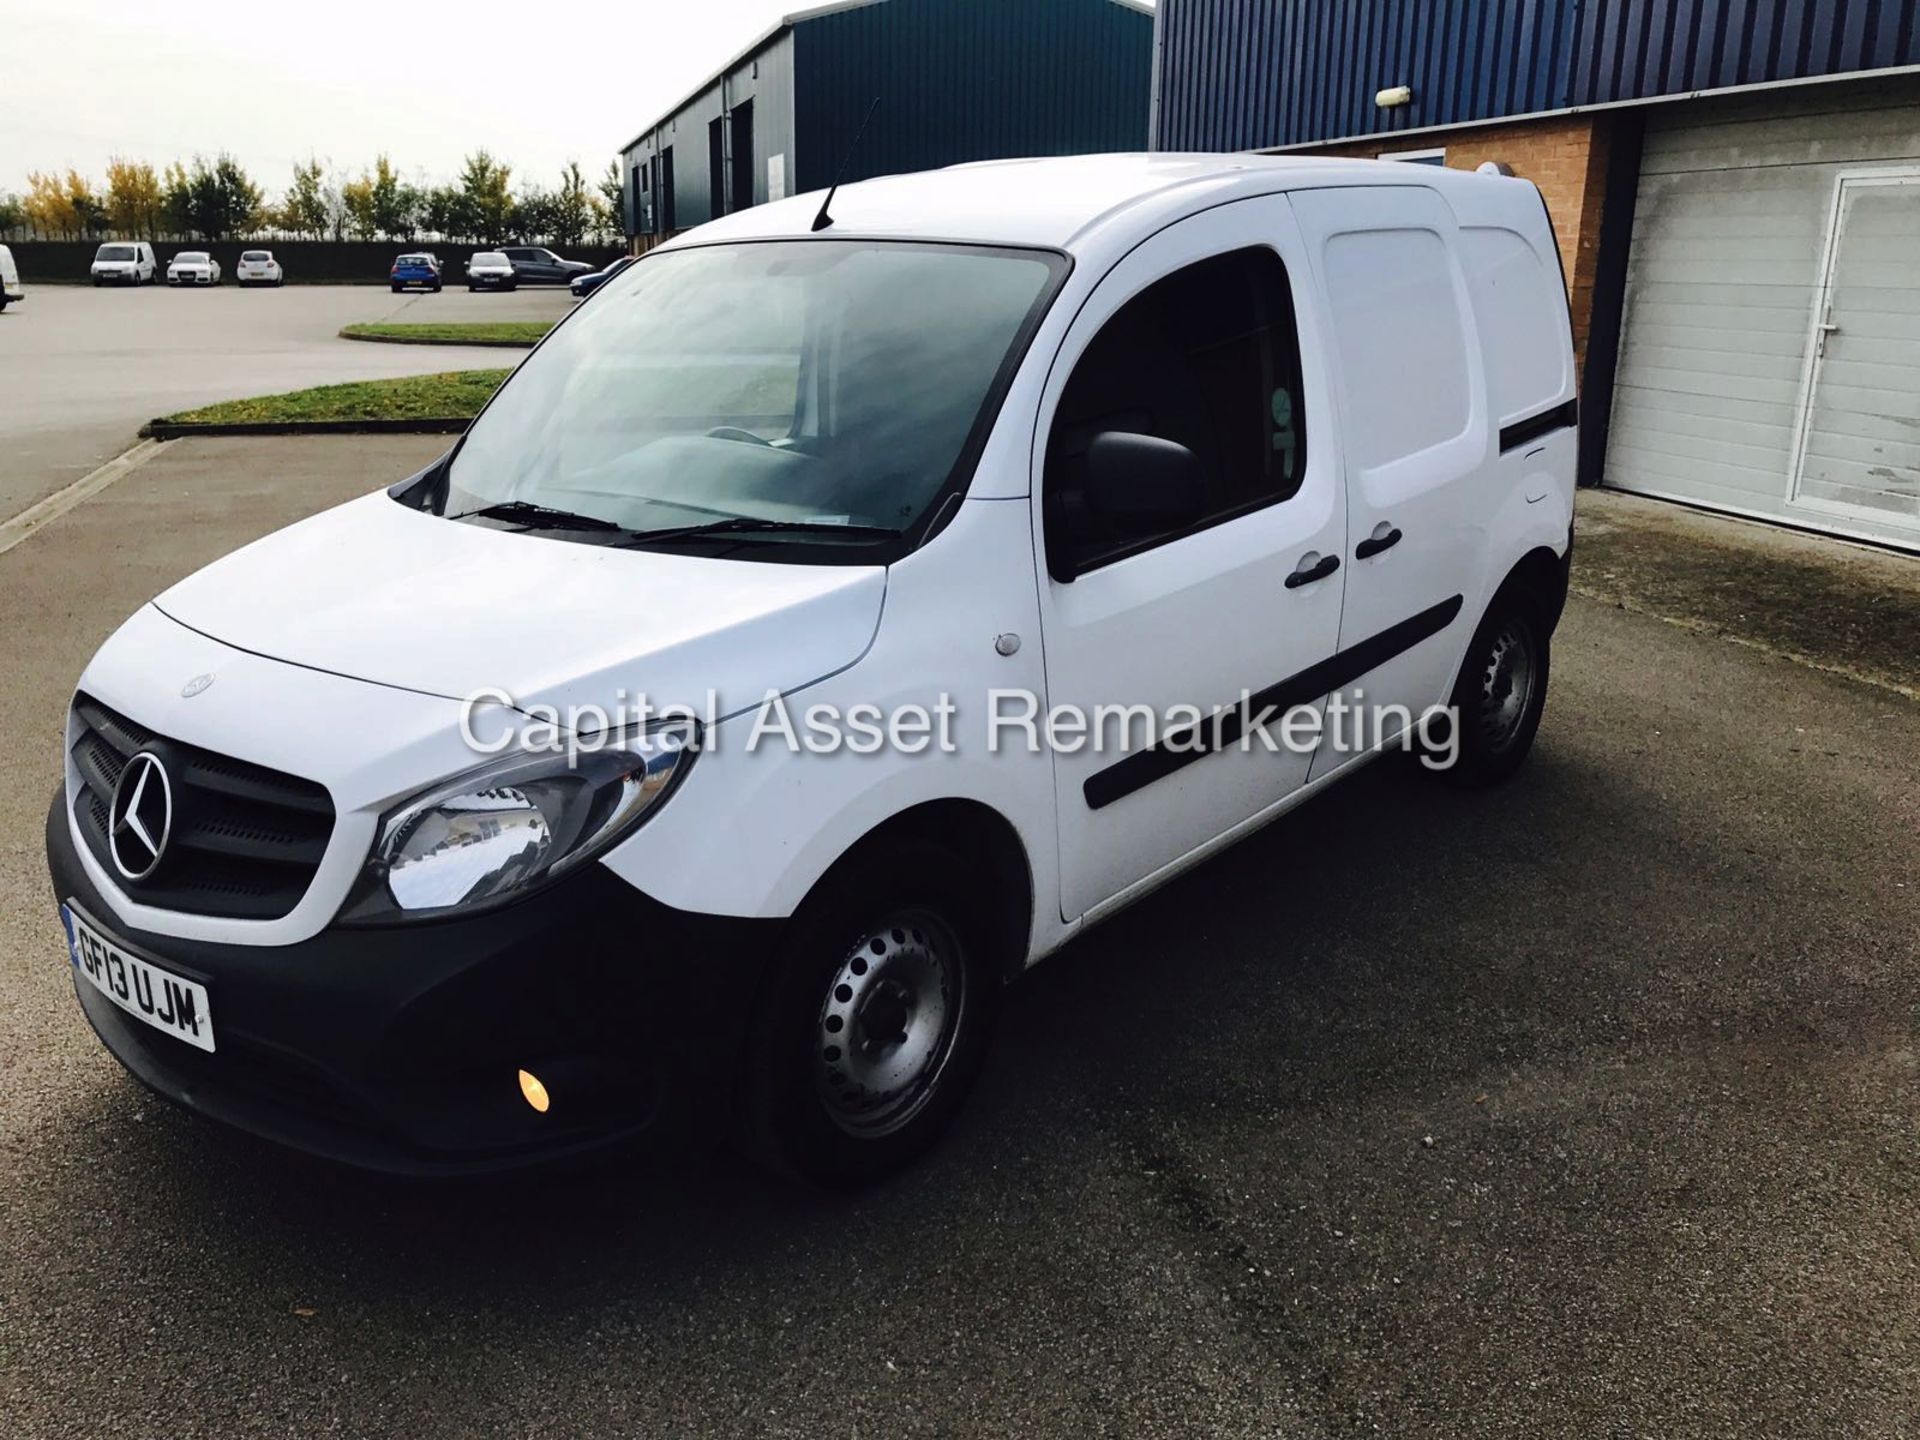 (ON SALE) MERCEDES CITAN 109CDI LONG WHEEL BASE - 13 REG - 1 OWNER FROM NEW - GREAT SPEC - LOOK!!! - Image 3 of 9